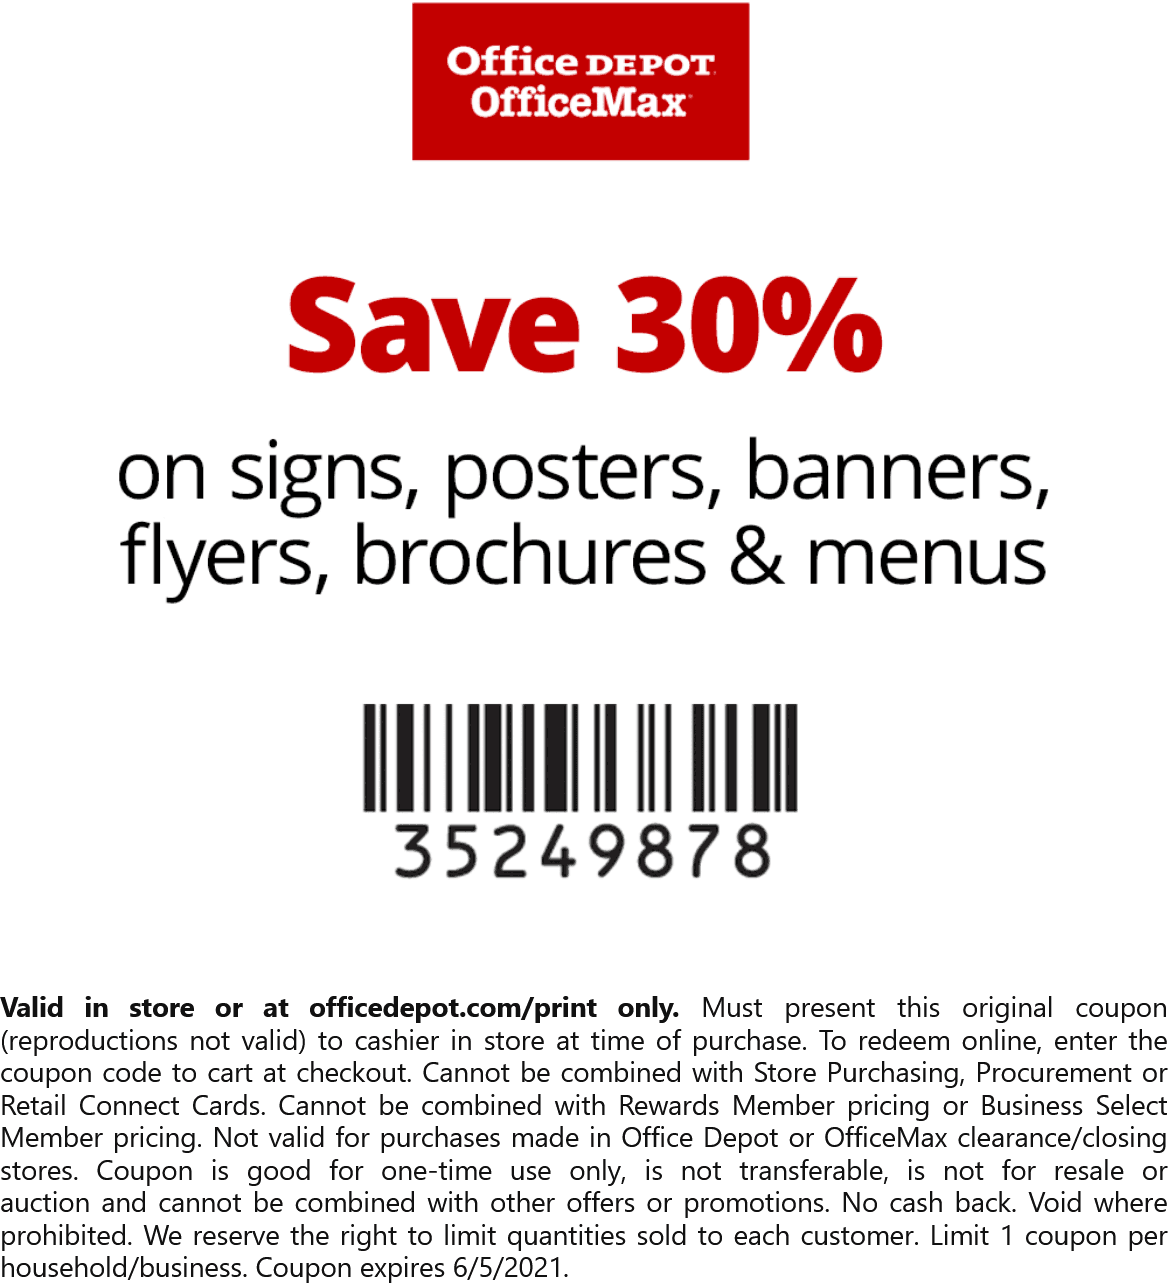 Office Depot stores Coupon  30% off signs posters flyers & more today at Office Depot OfficeMax #officedepot 